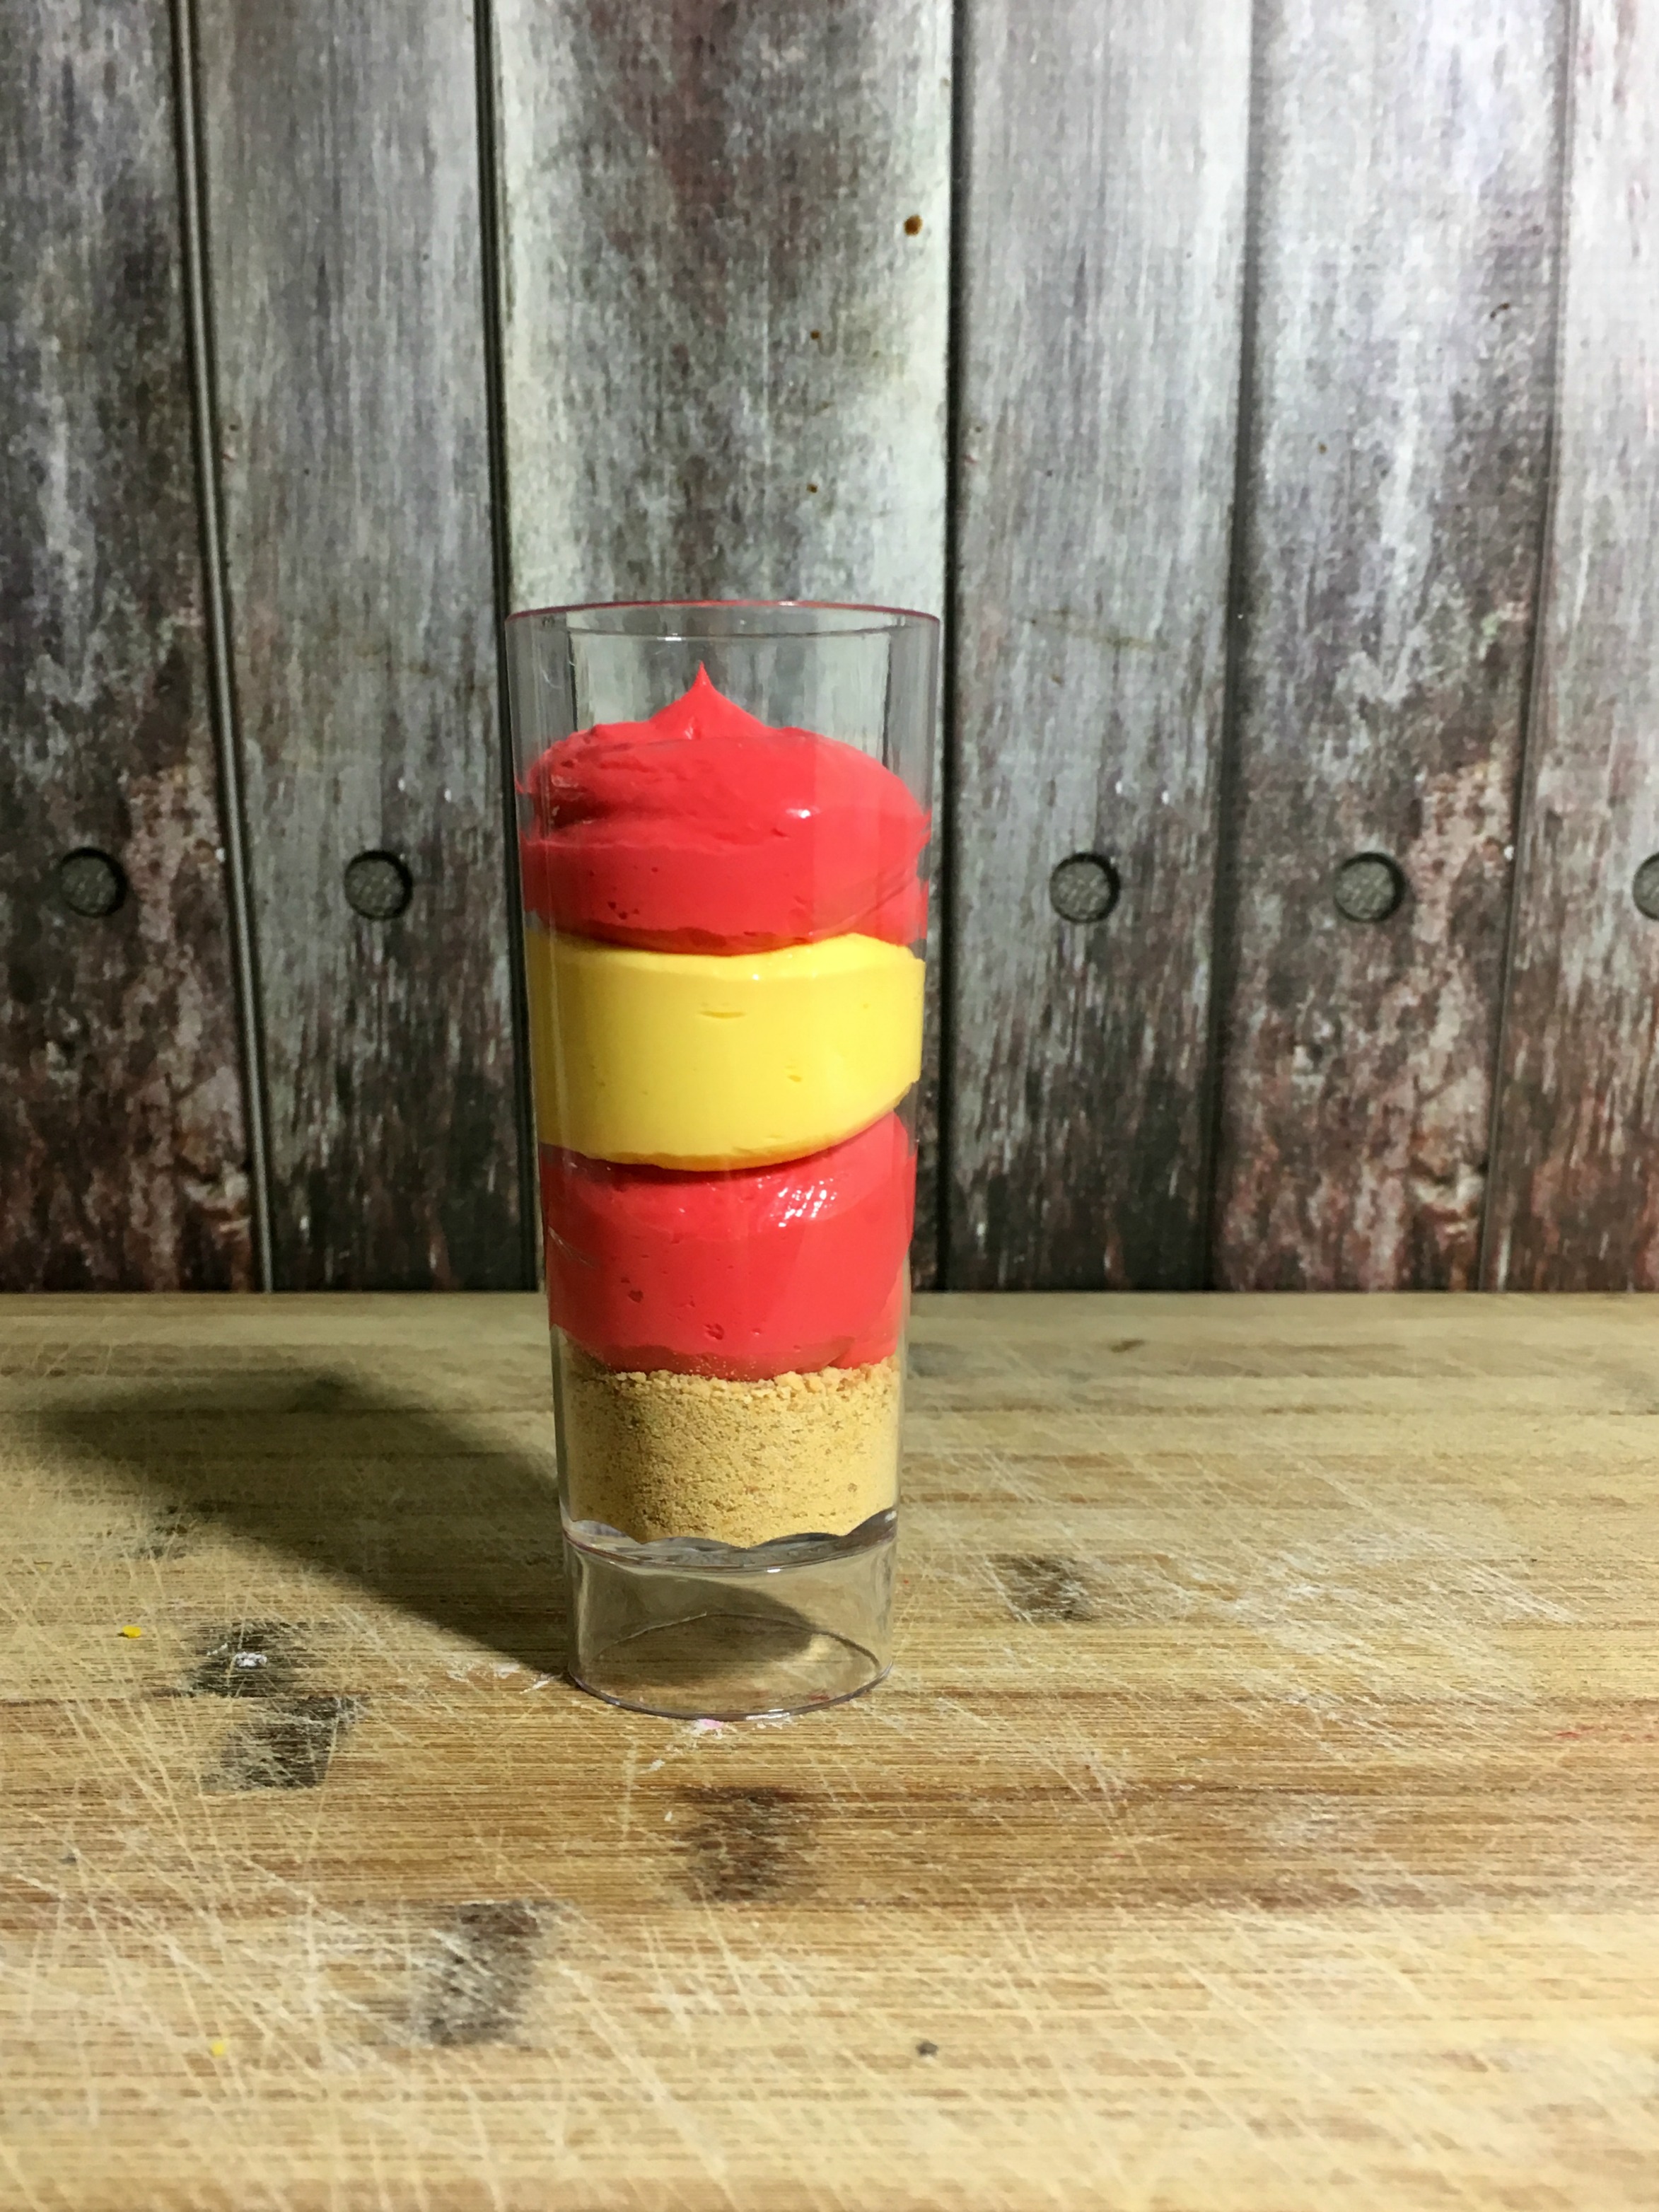 Disney's Beauty and the Beast inspired Cheesecake Shooters Recipe